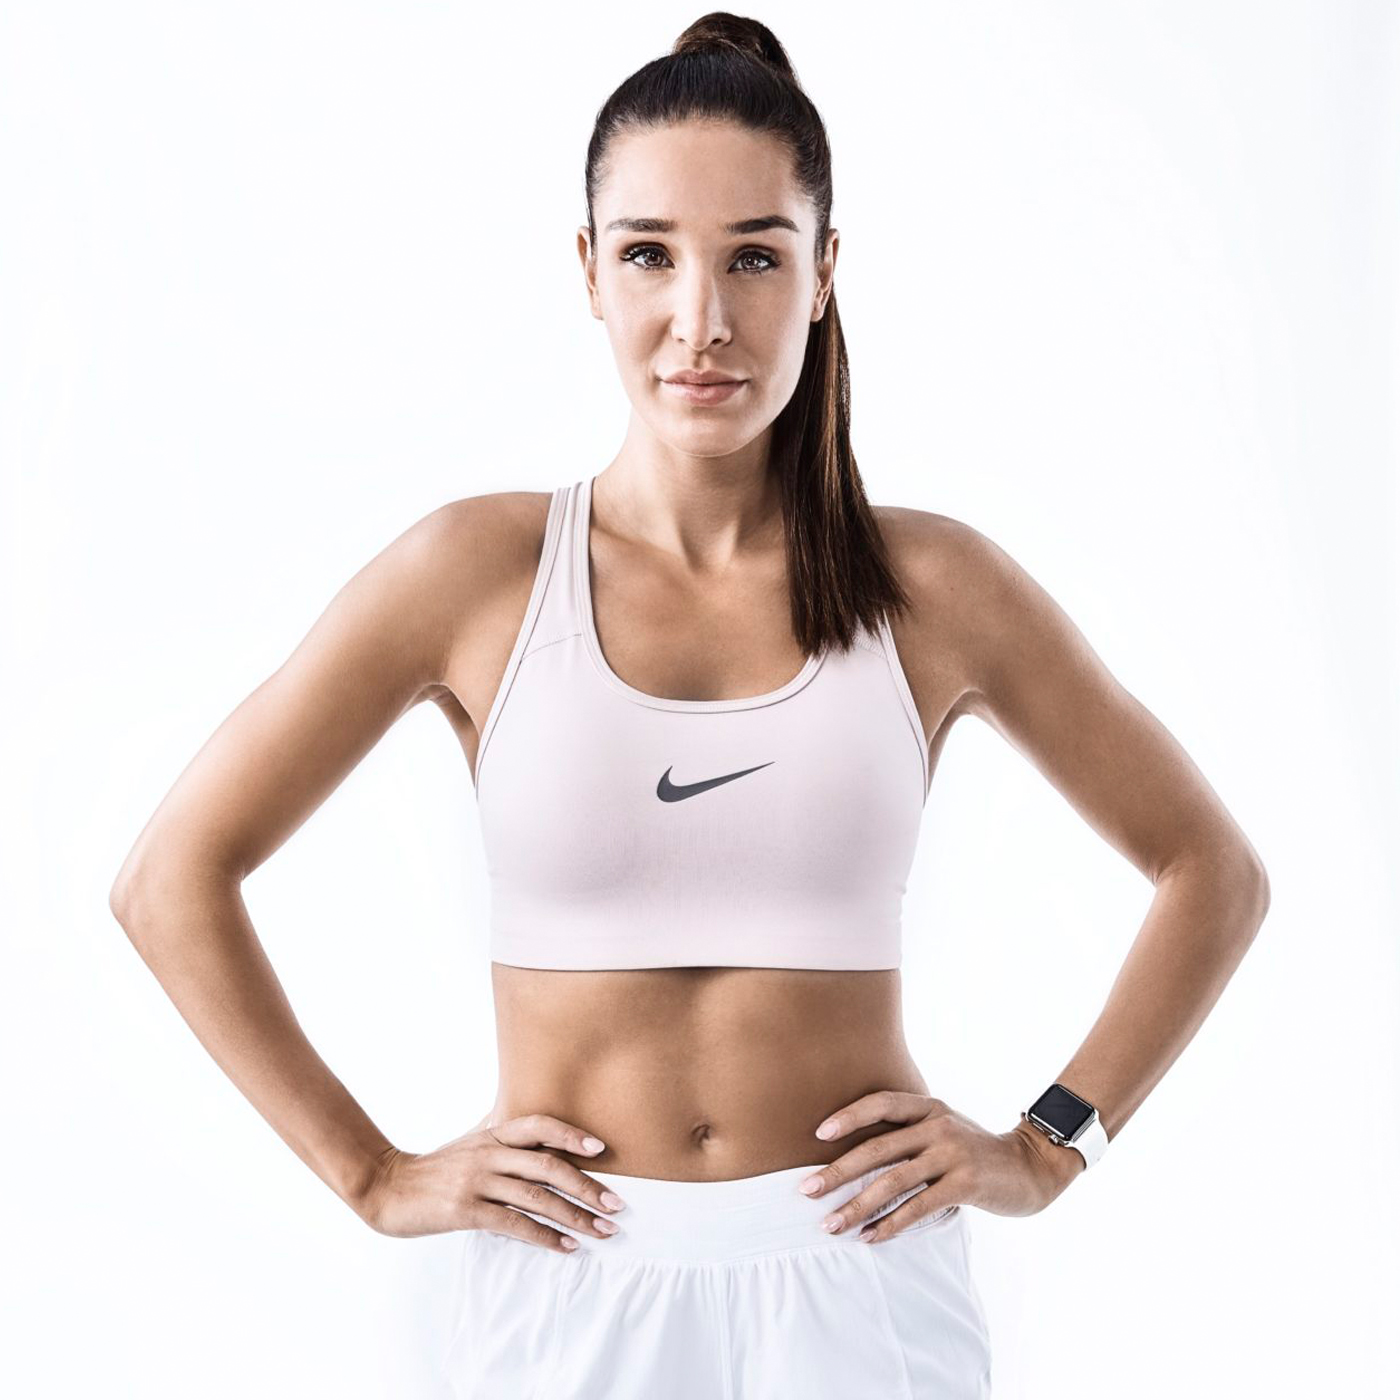 Kayla Itsines is not a fitness influencer